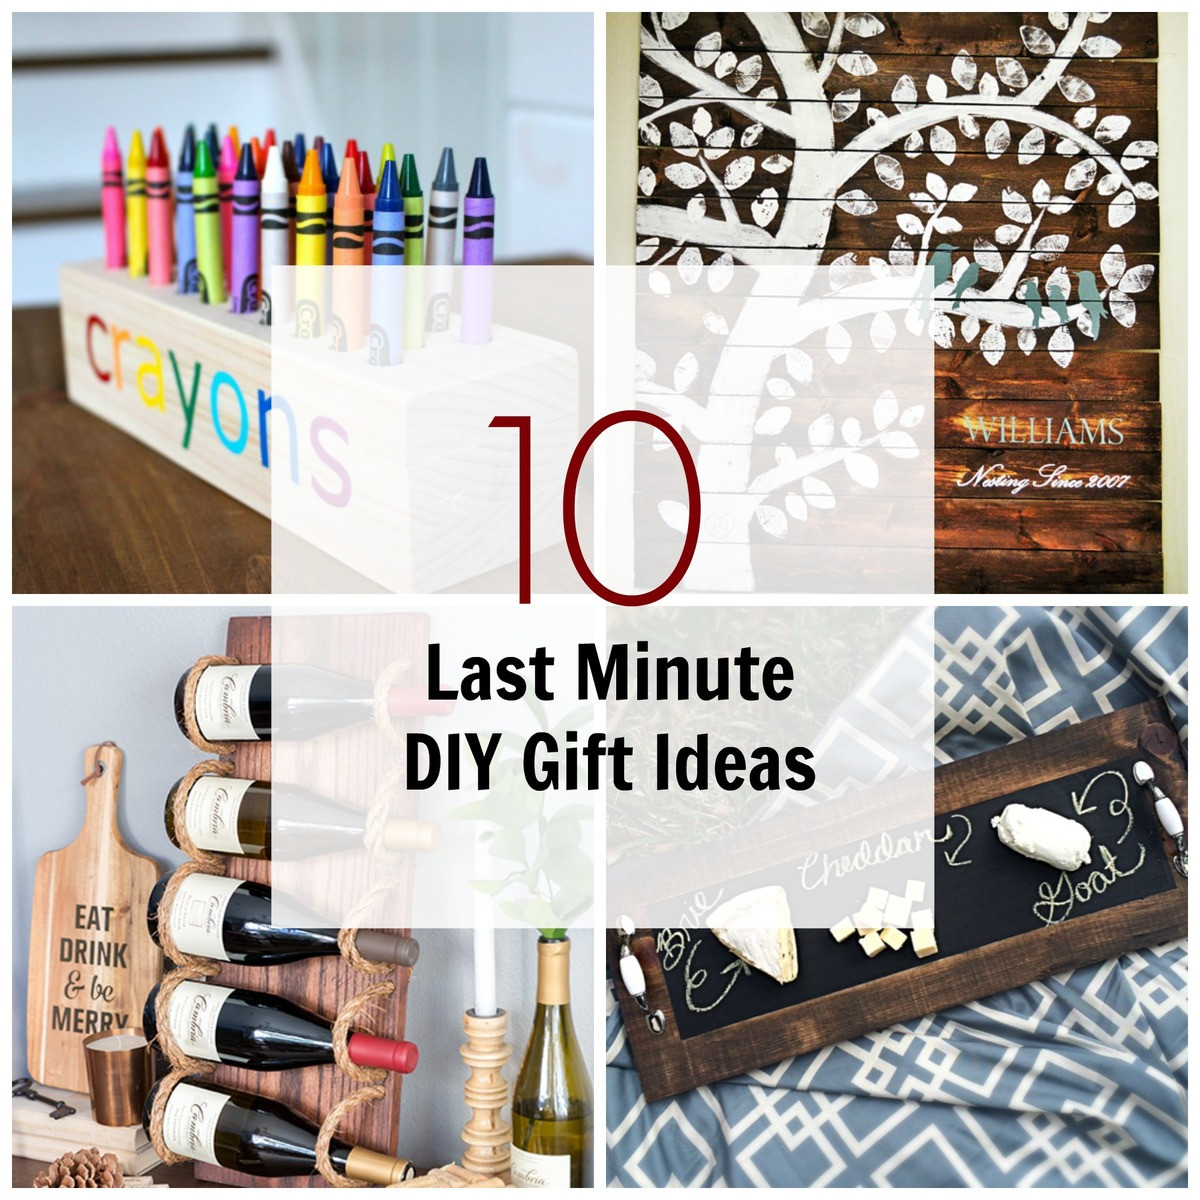 DIY Wood Gifts
 10 Last Minute DIY Wood Gifts that you Can Make